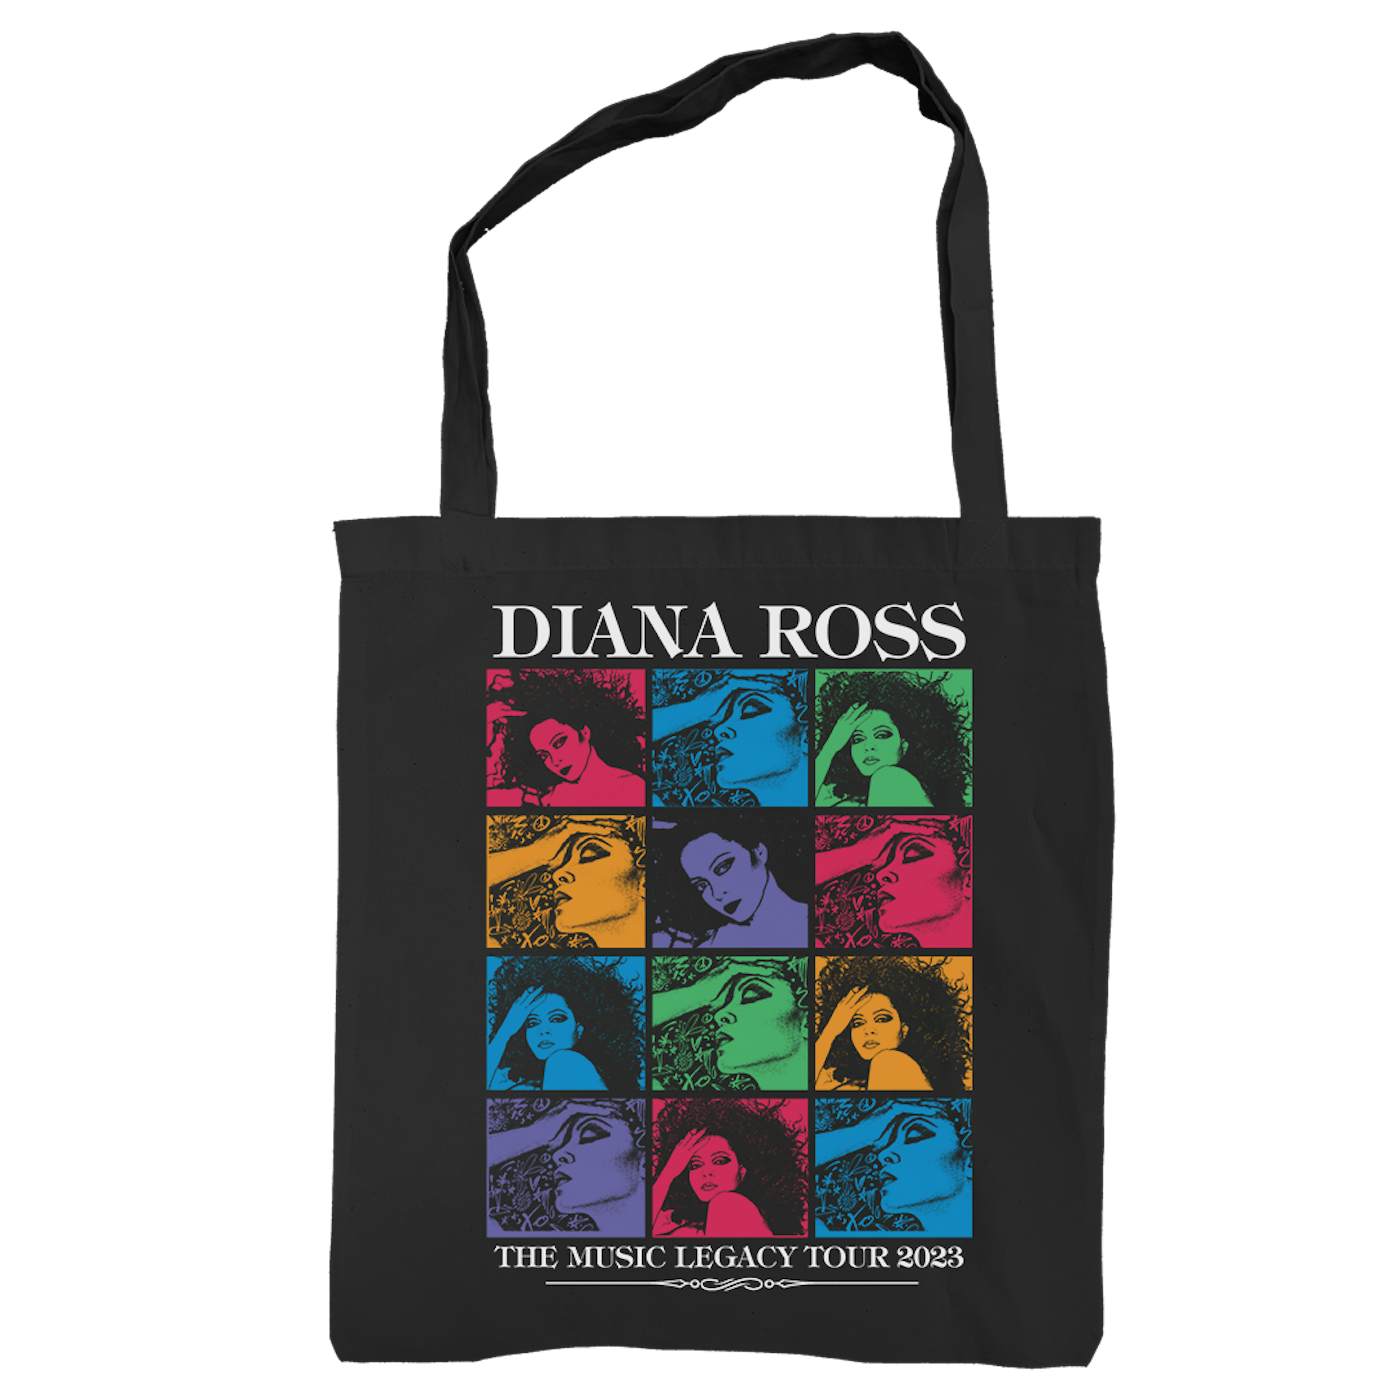 Diana Ross "12 Squares" Tote